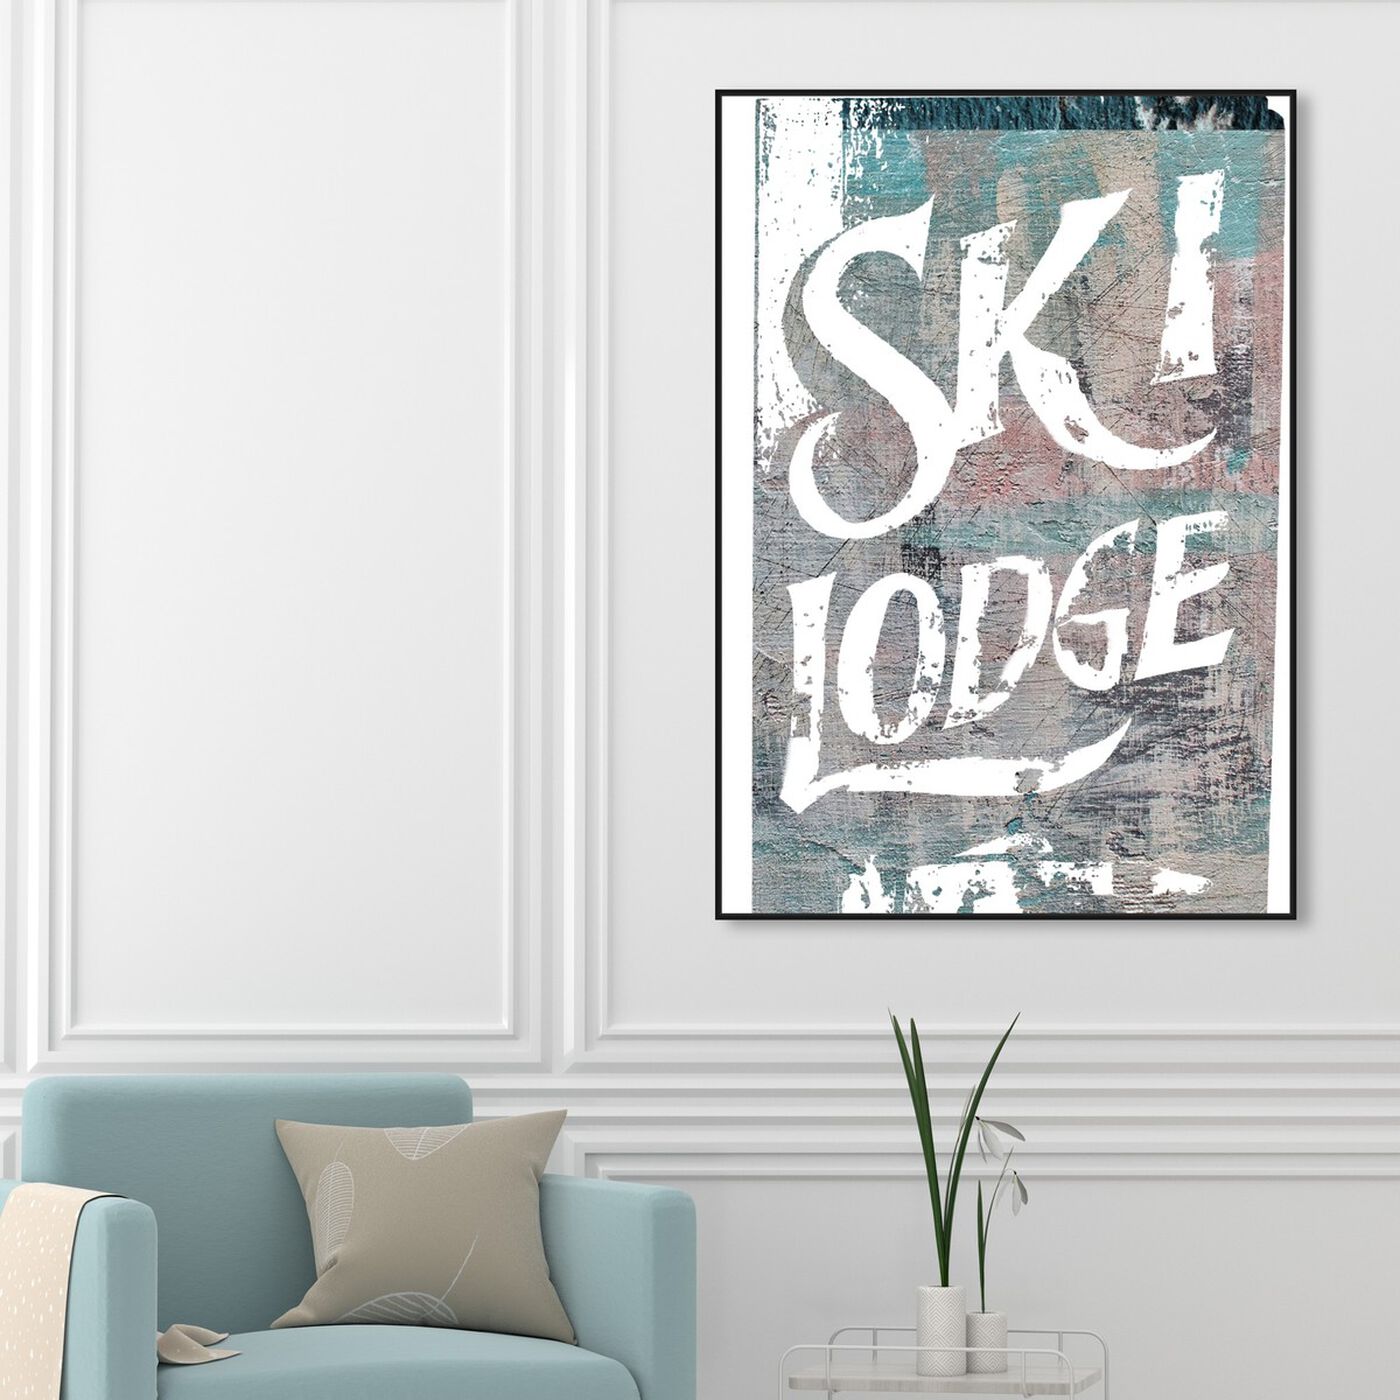 Hanging view of Ski Lodge featuring sports and teams and skiing art.